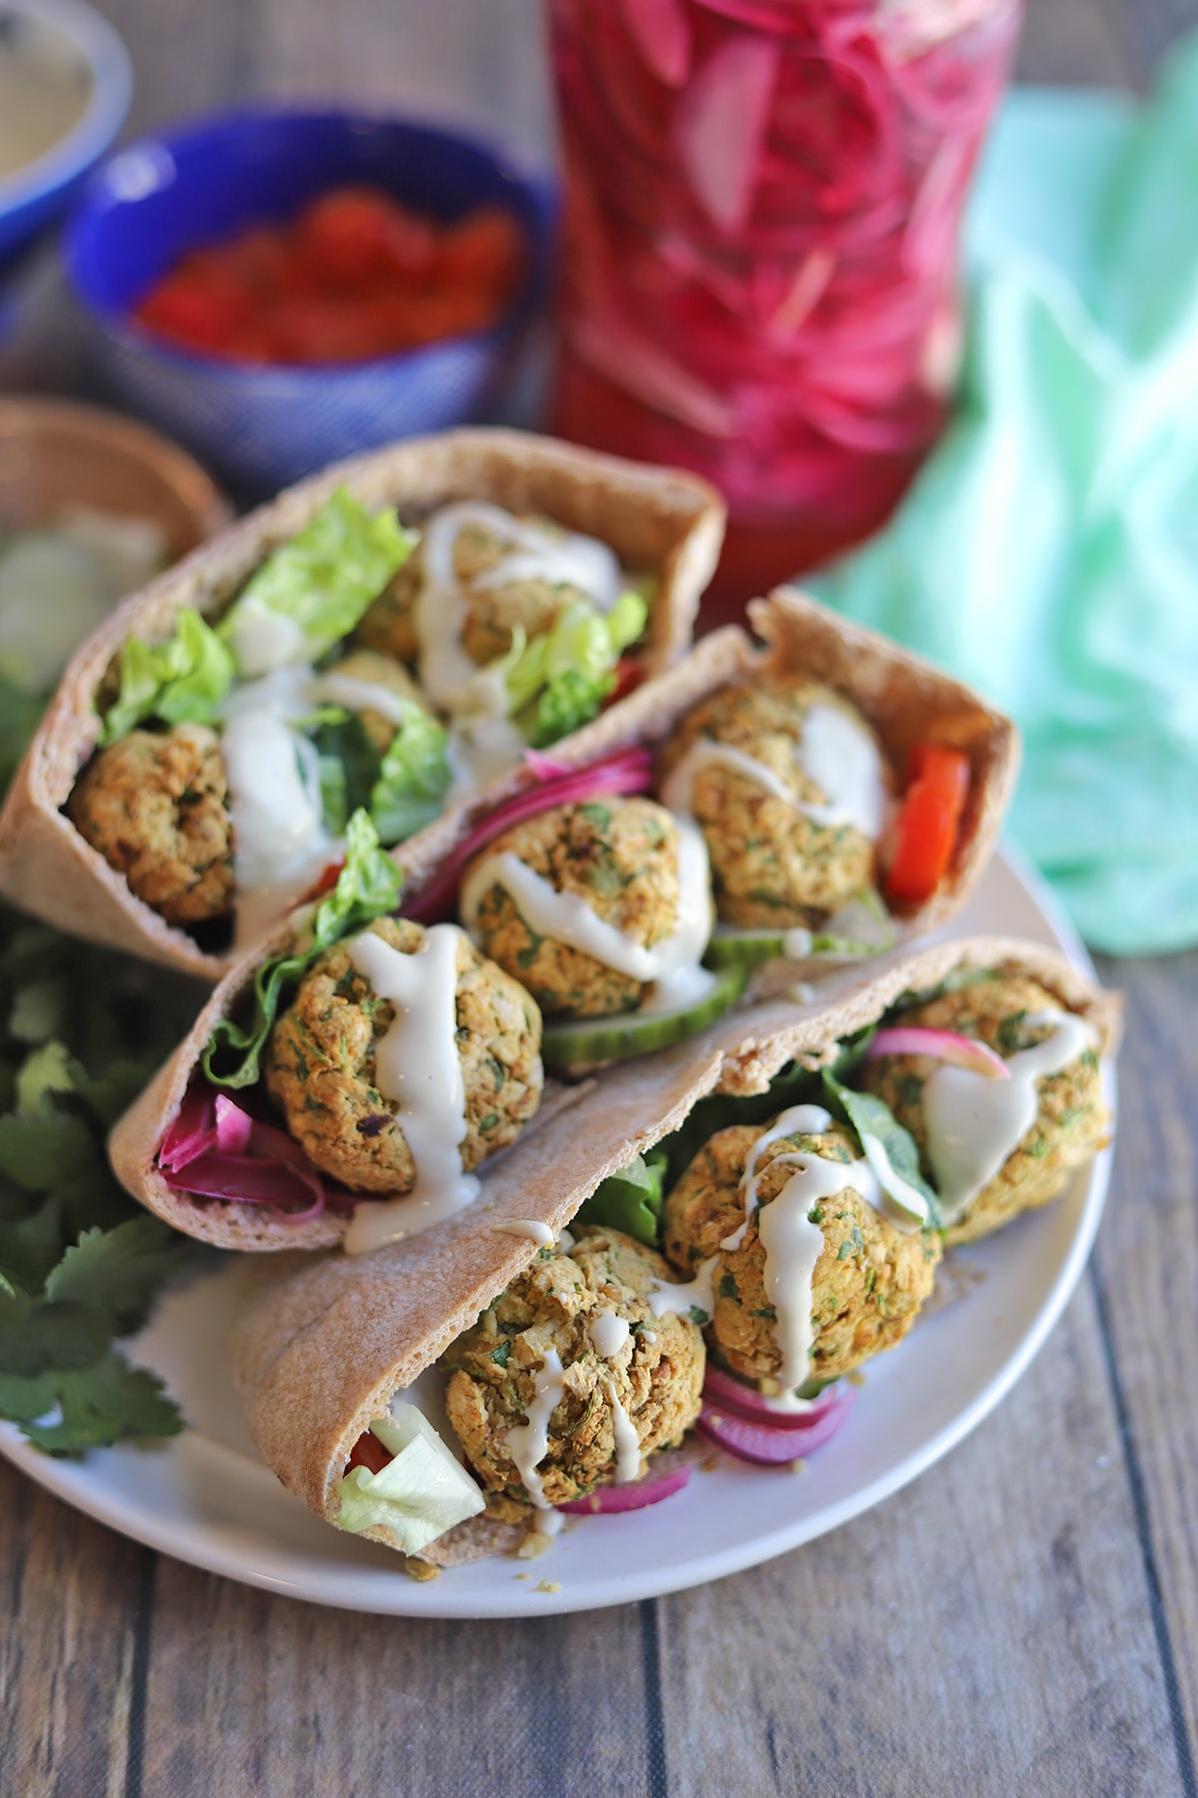  A colorful plate filled with falafel that are packed with flavor.